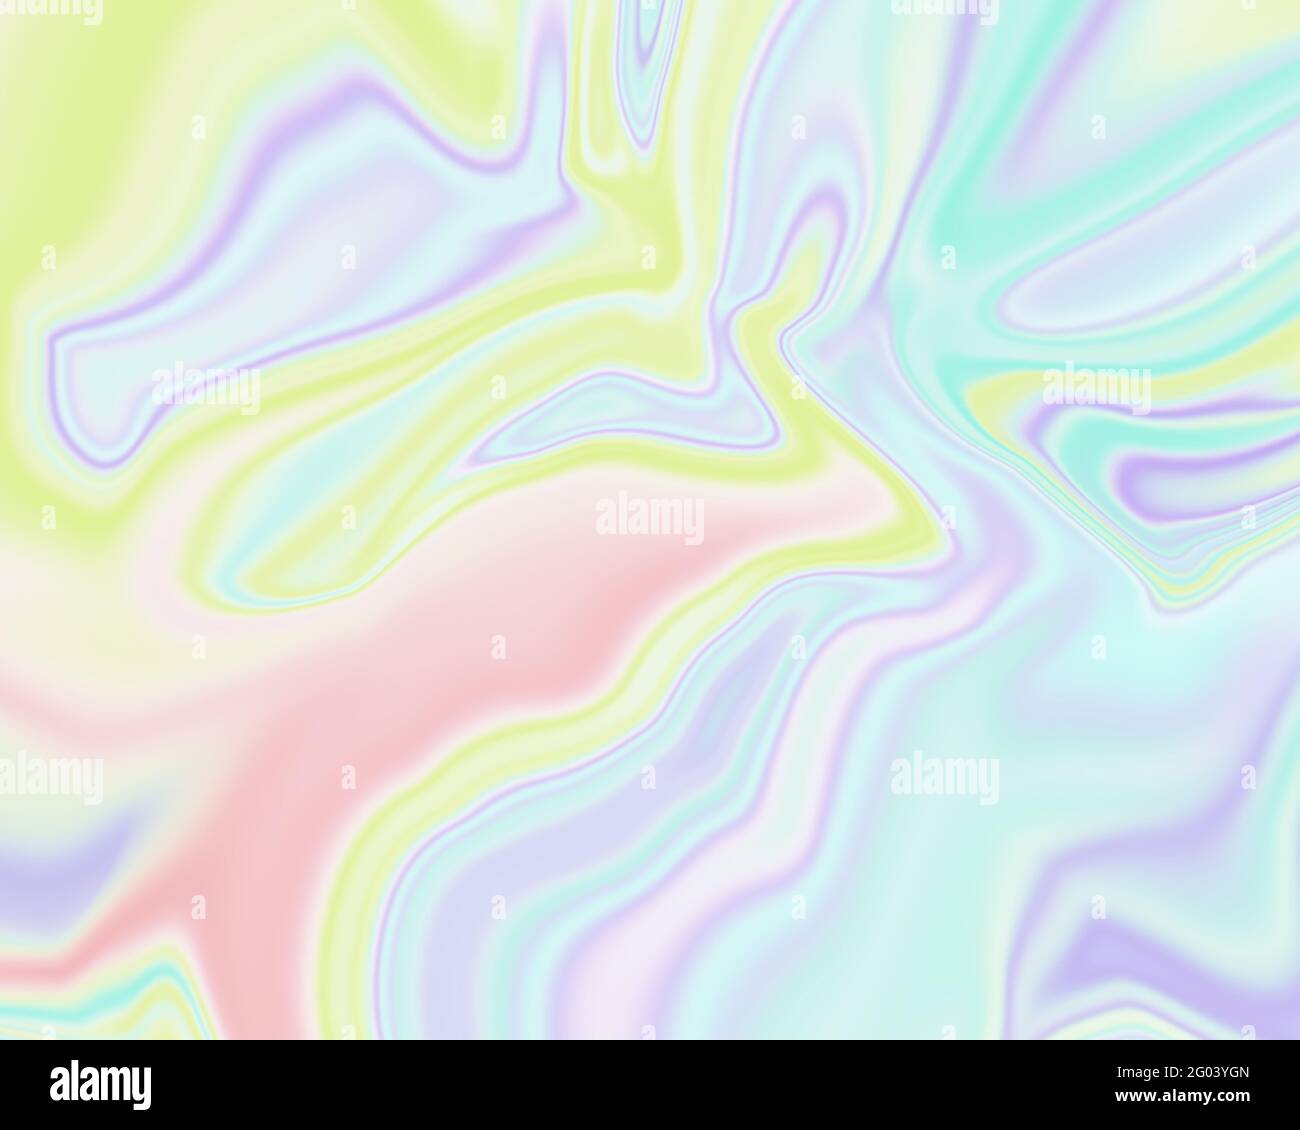 Abstract holographic foil background texture. Abstract soft pastel colored backdrop Stock Photo